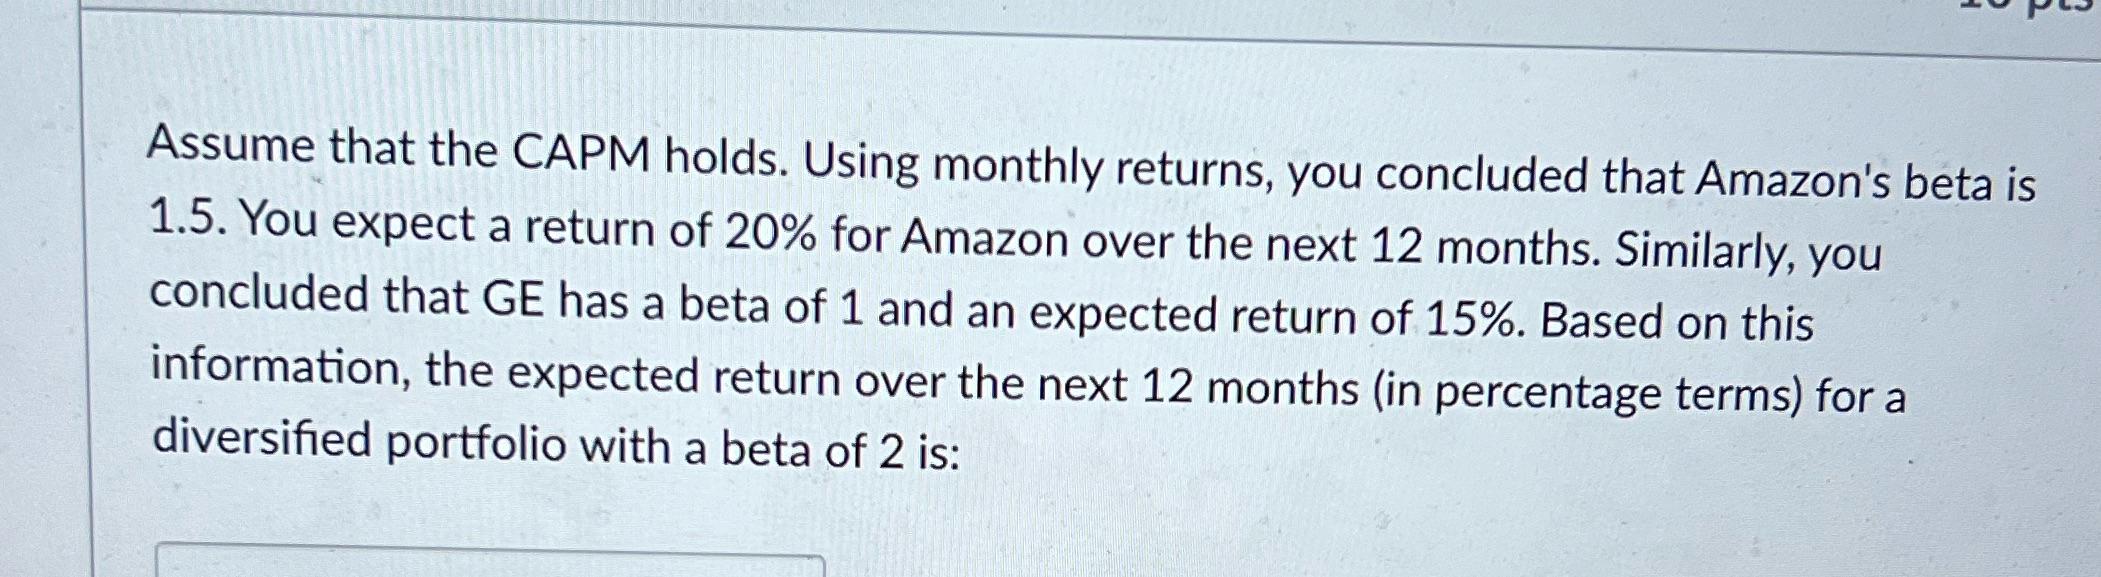 Assume that the CAPM holds. Using monthly returns, you concluded that Amazon's beta is 1.5. You expect a